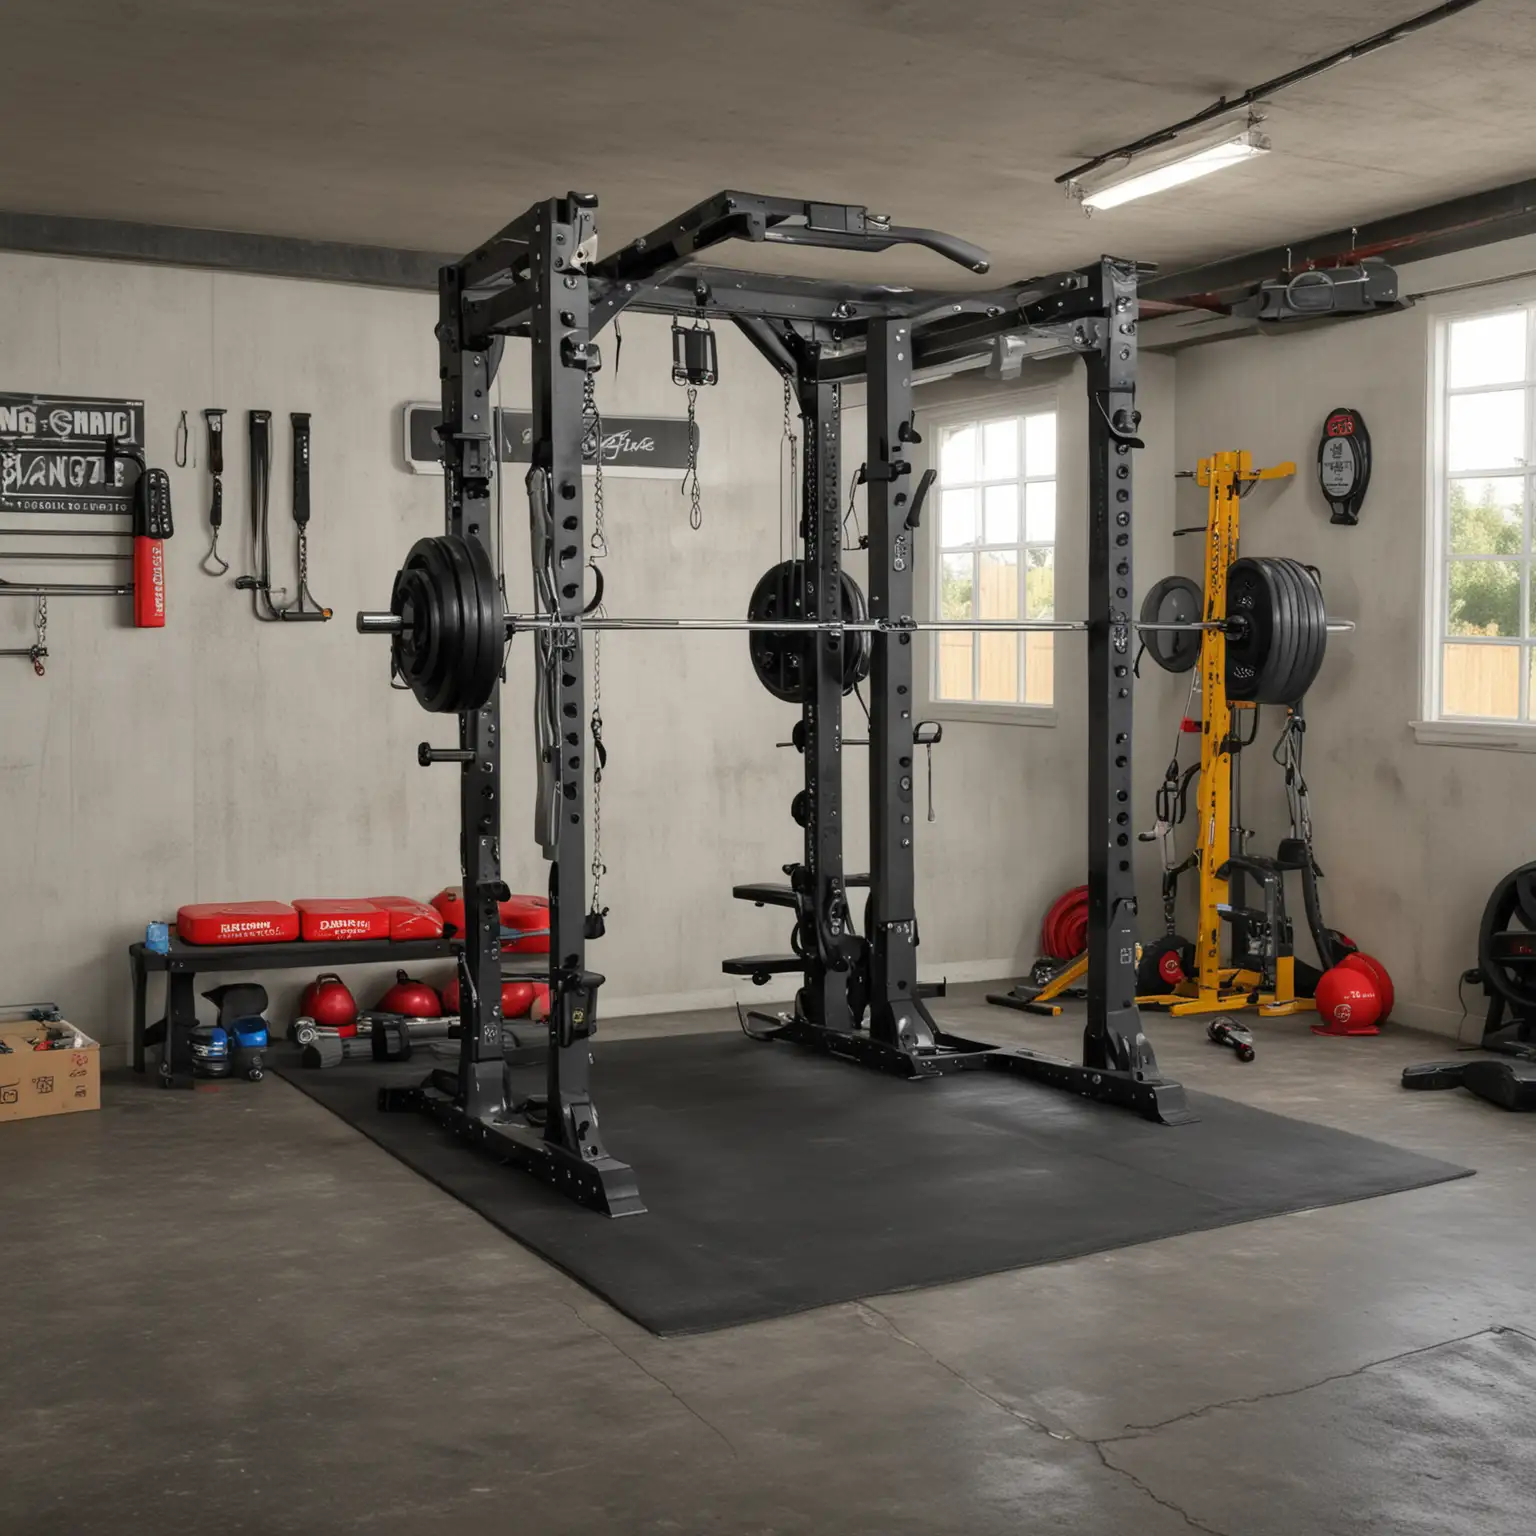 Create a realistic image of a professional looking garage gym